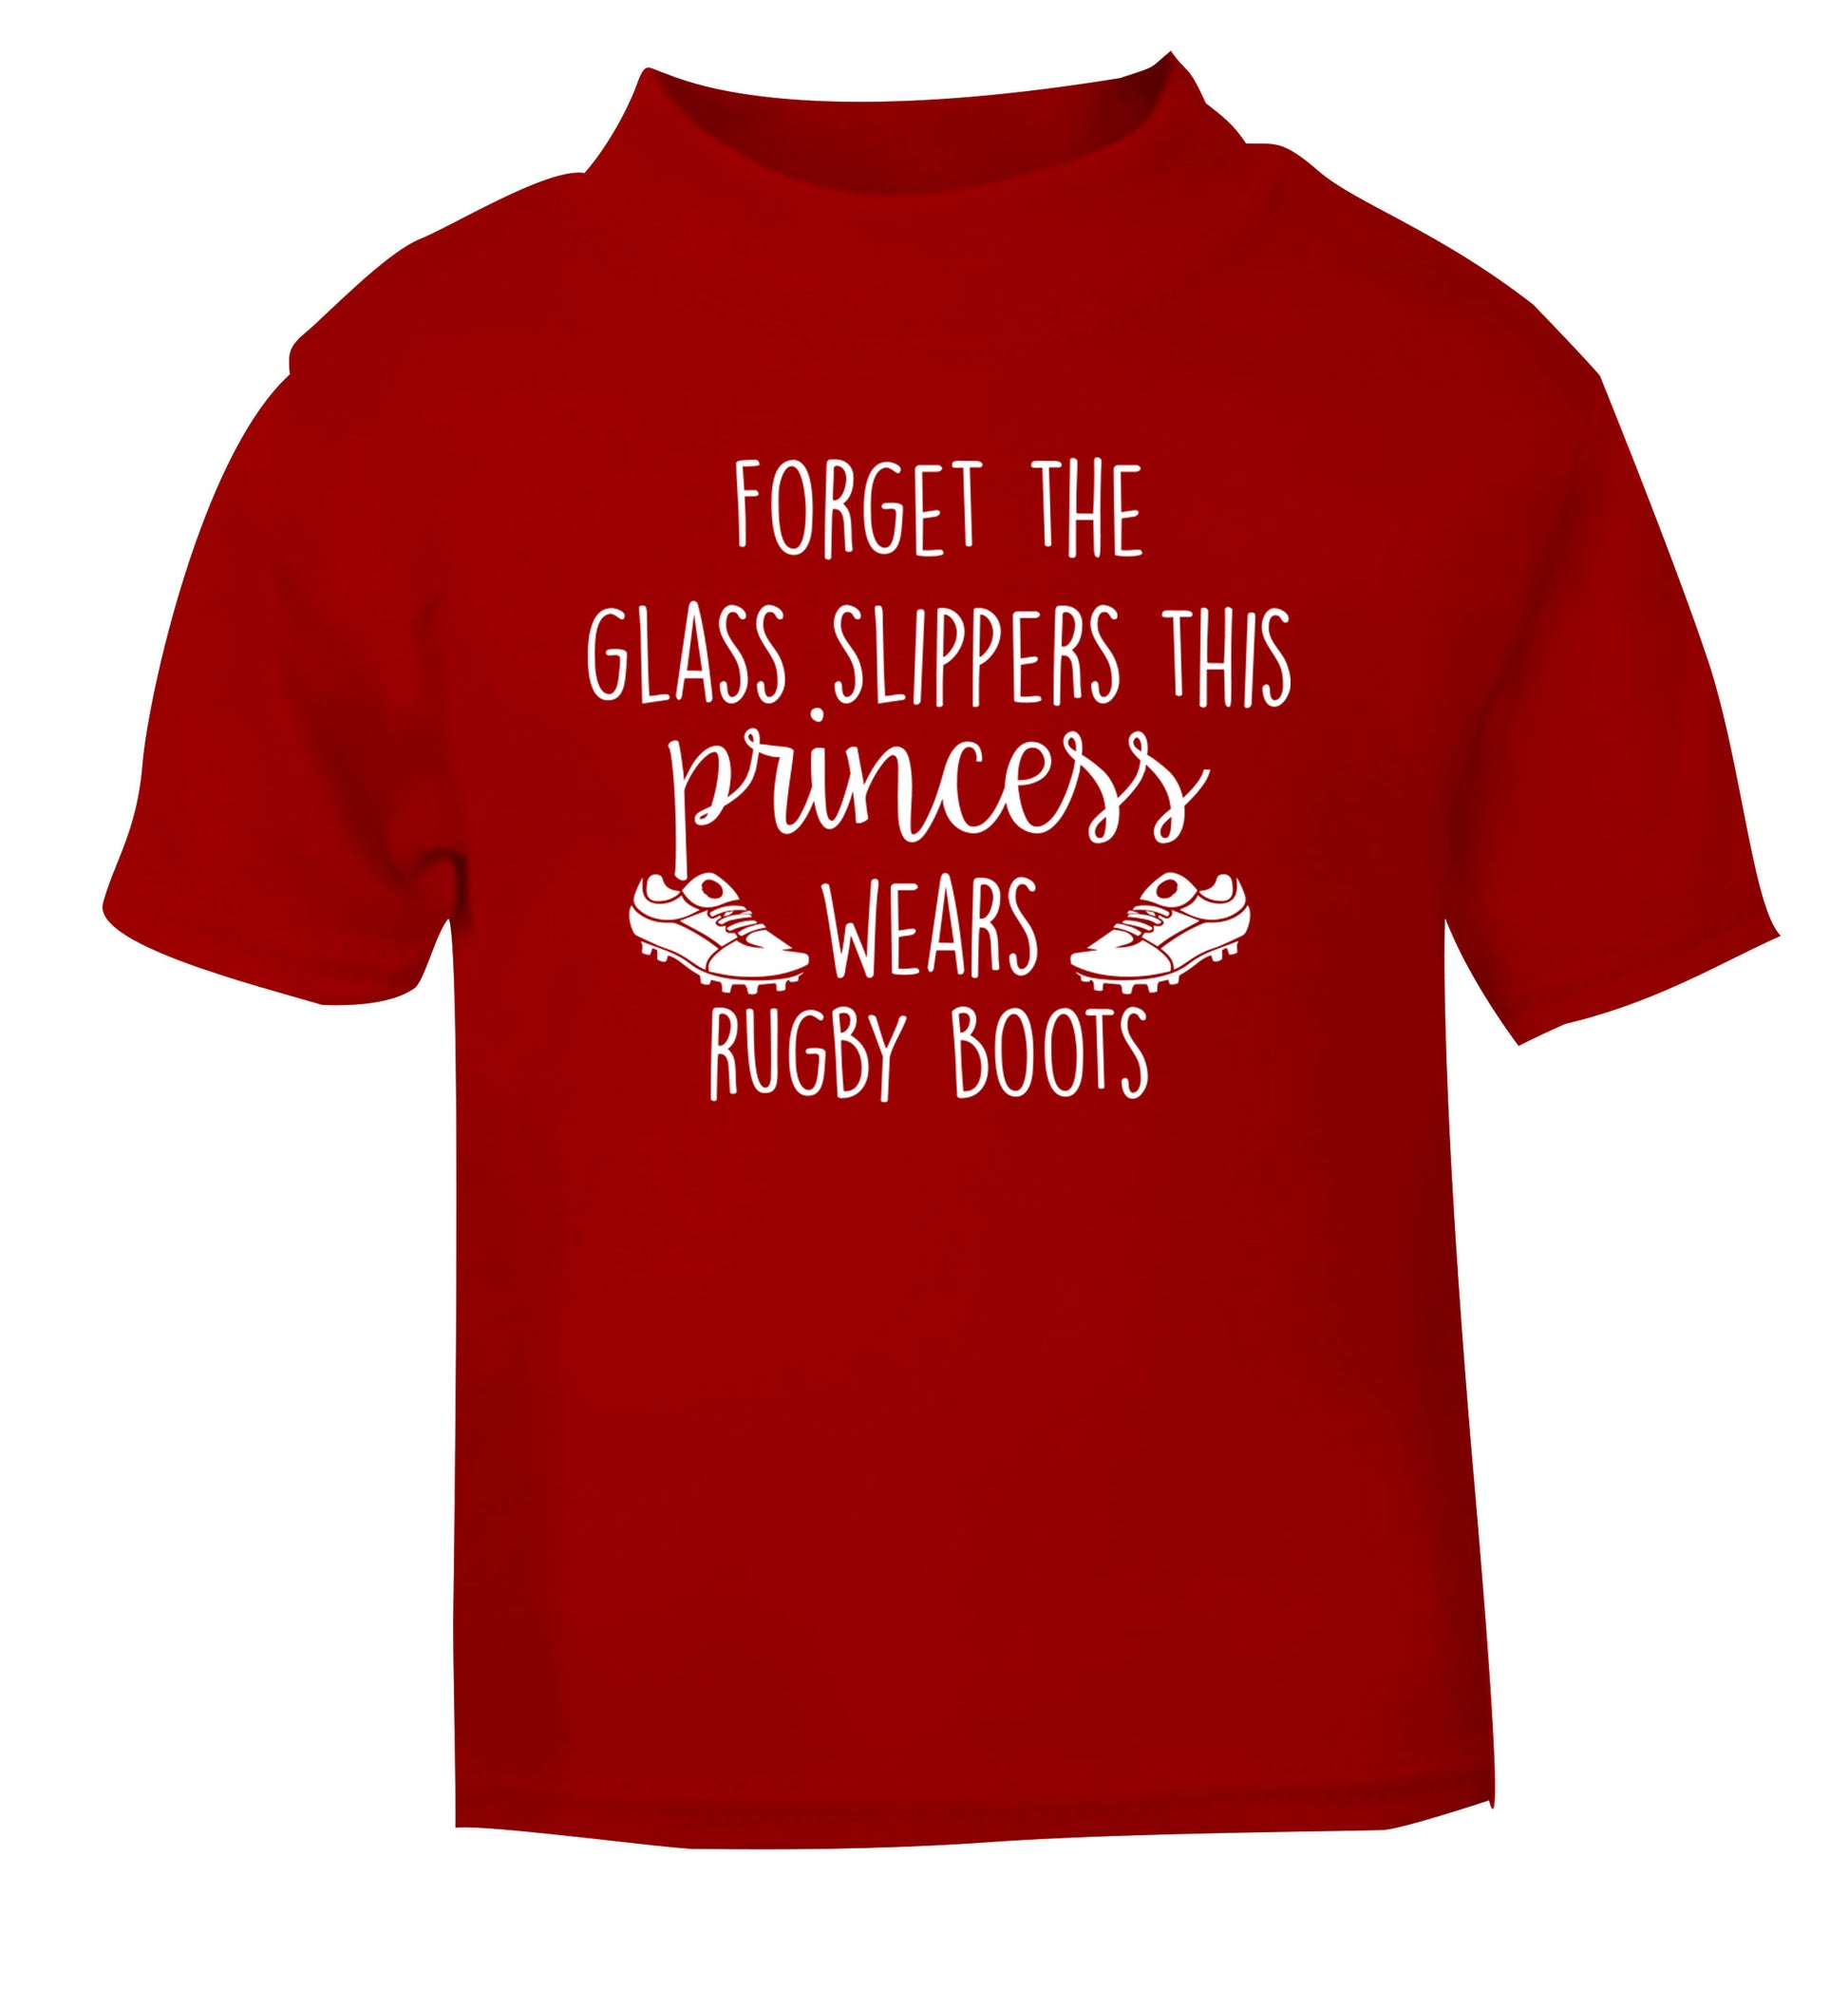 Forget the glass slippers this princess wears rugby boots red Baby Toddler Tshirt 2 Years